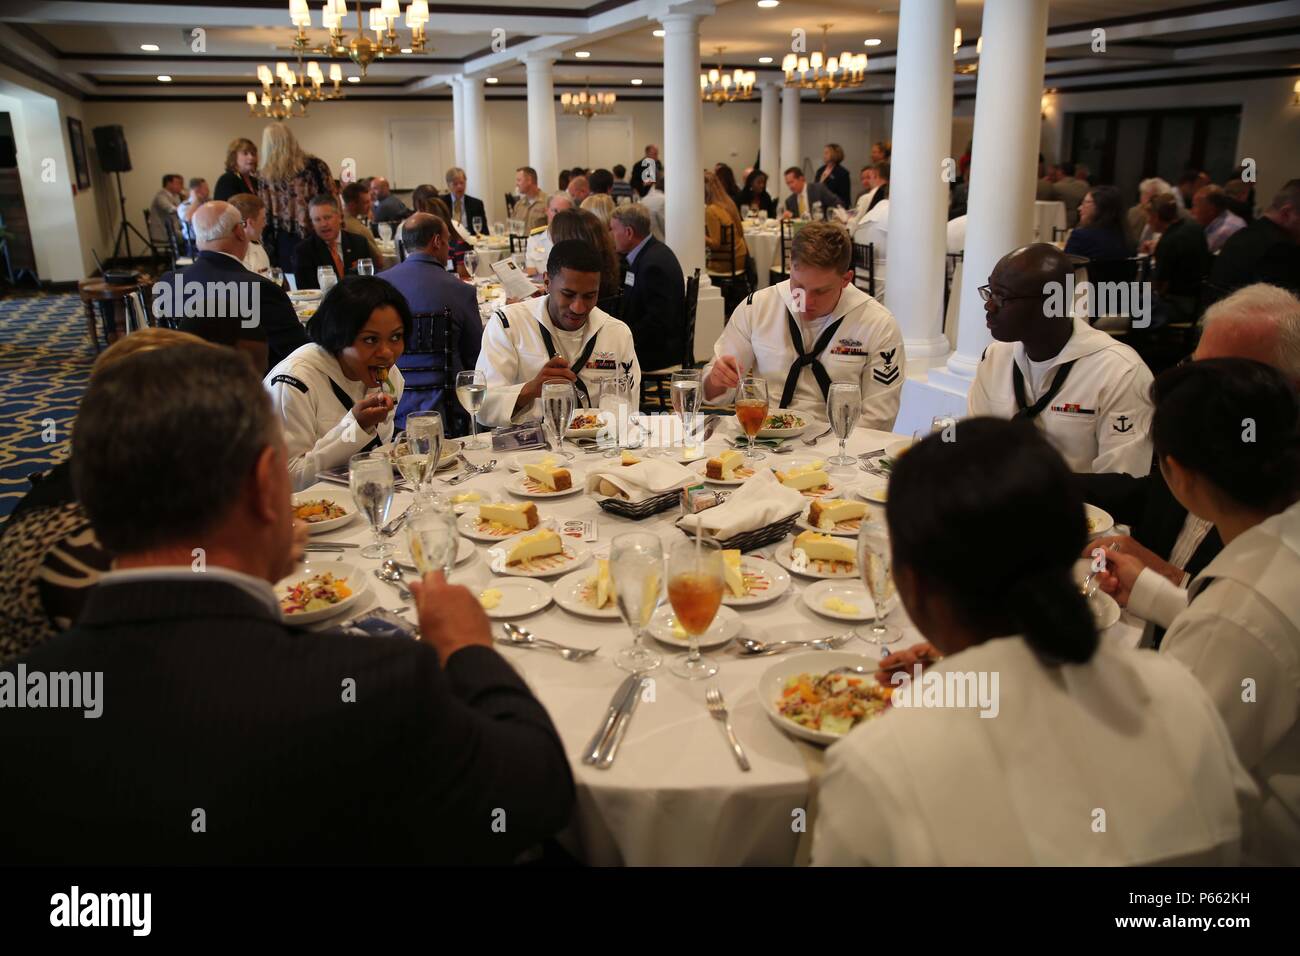 Marines and Sailors attend the Port Everglades Association Luncheon as part of Fleet Week Port Everglades, Fort Lauderdale, Fla., May 6, 2016. Fleet Week will give the community of South Florida the opportunity to interact with the Marines and Sailors of the ship as well as see up-close and personal some of the capabilities and equipment the Marine Corps employs. (U.S. Marine Corps photo by Lance Cpl. Brianna Gaudi/Released.) Stock Photo